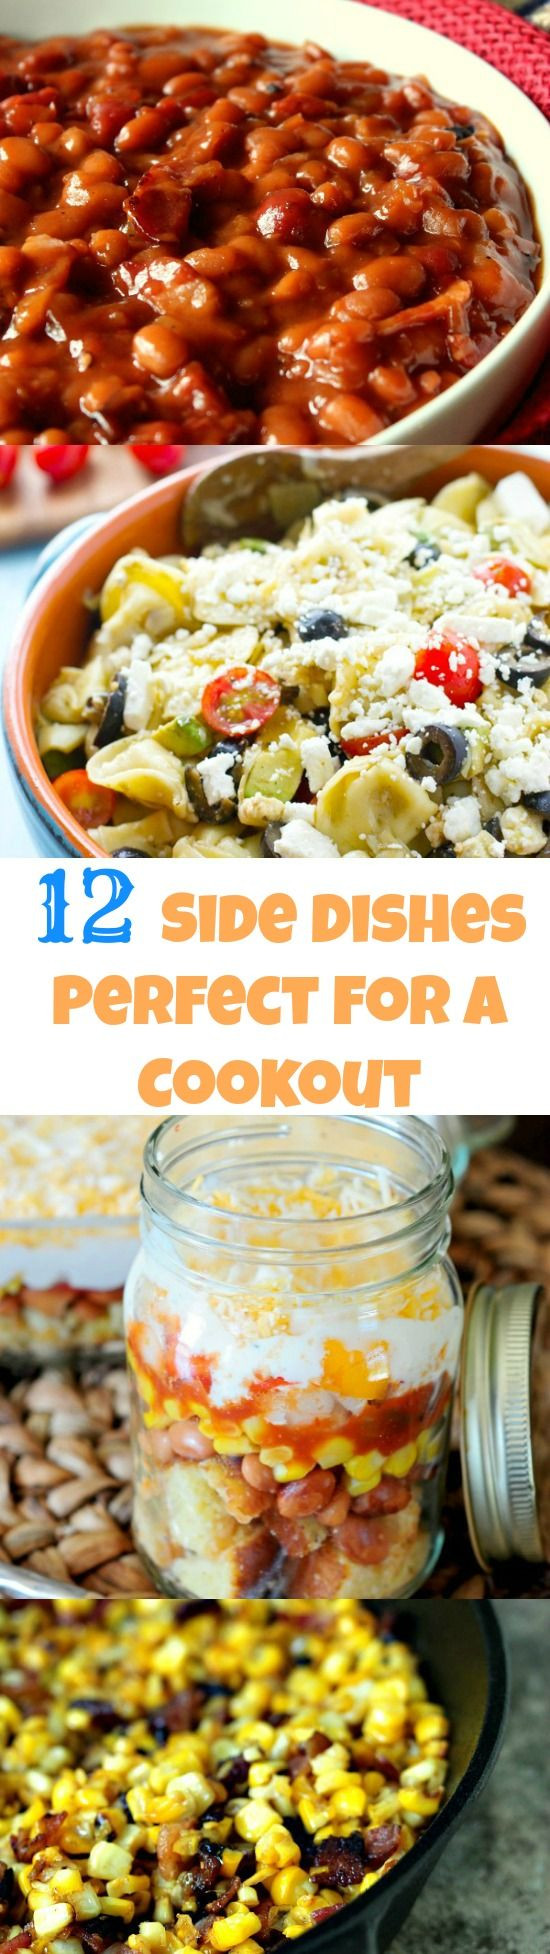 favorite cookout side dishes